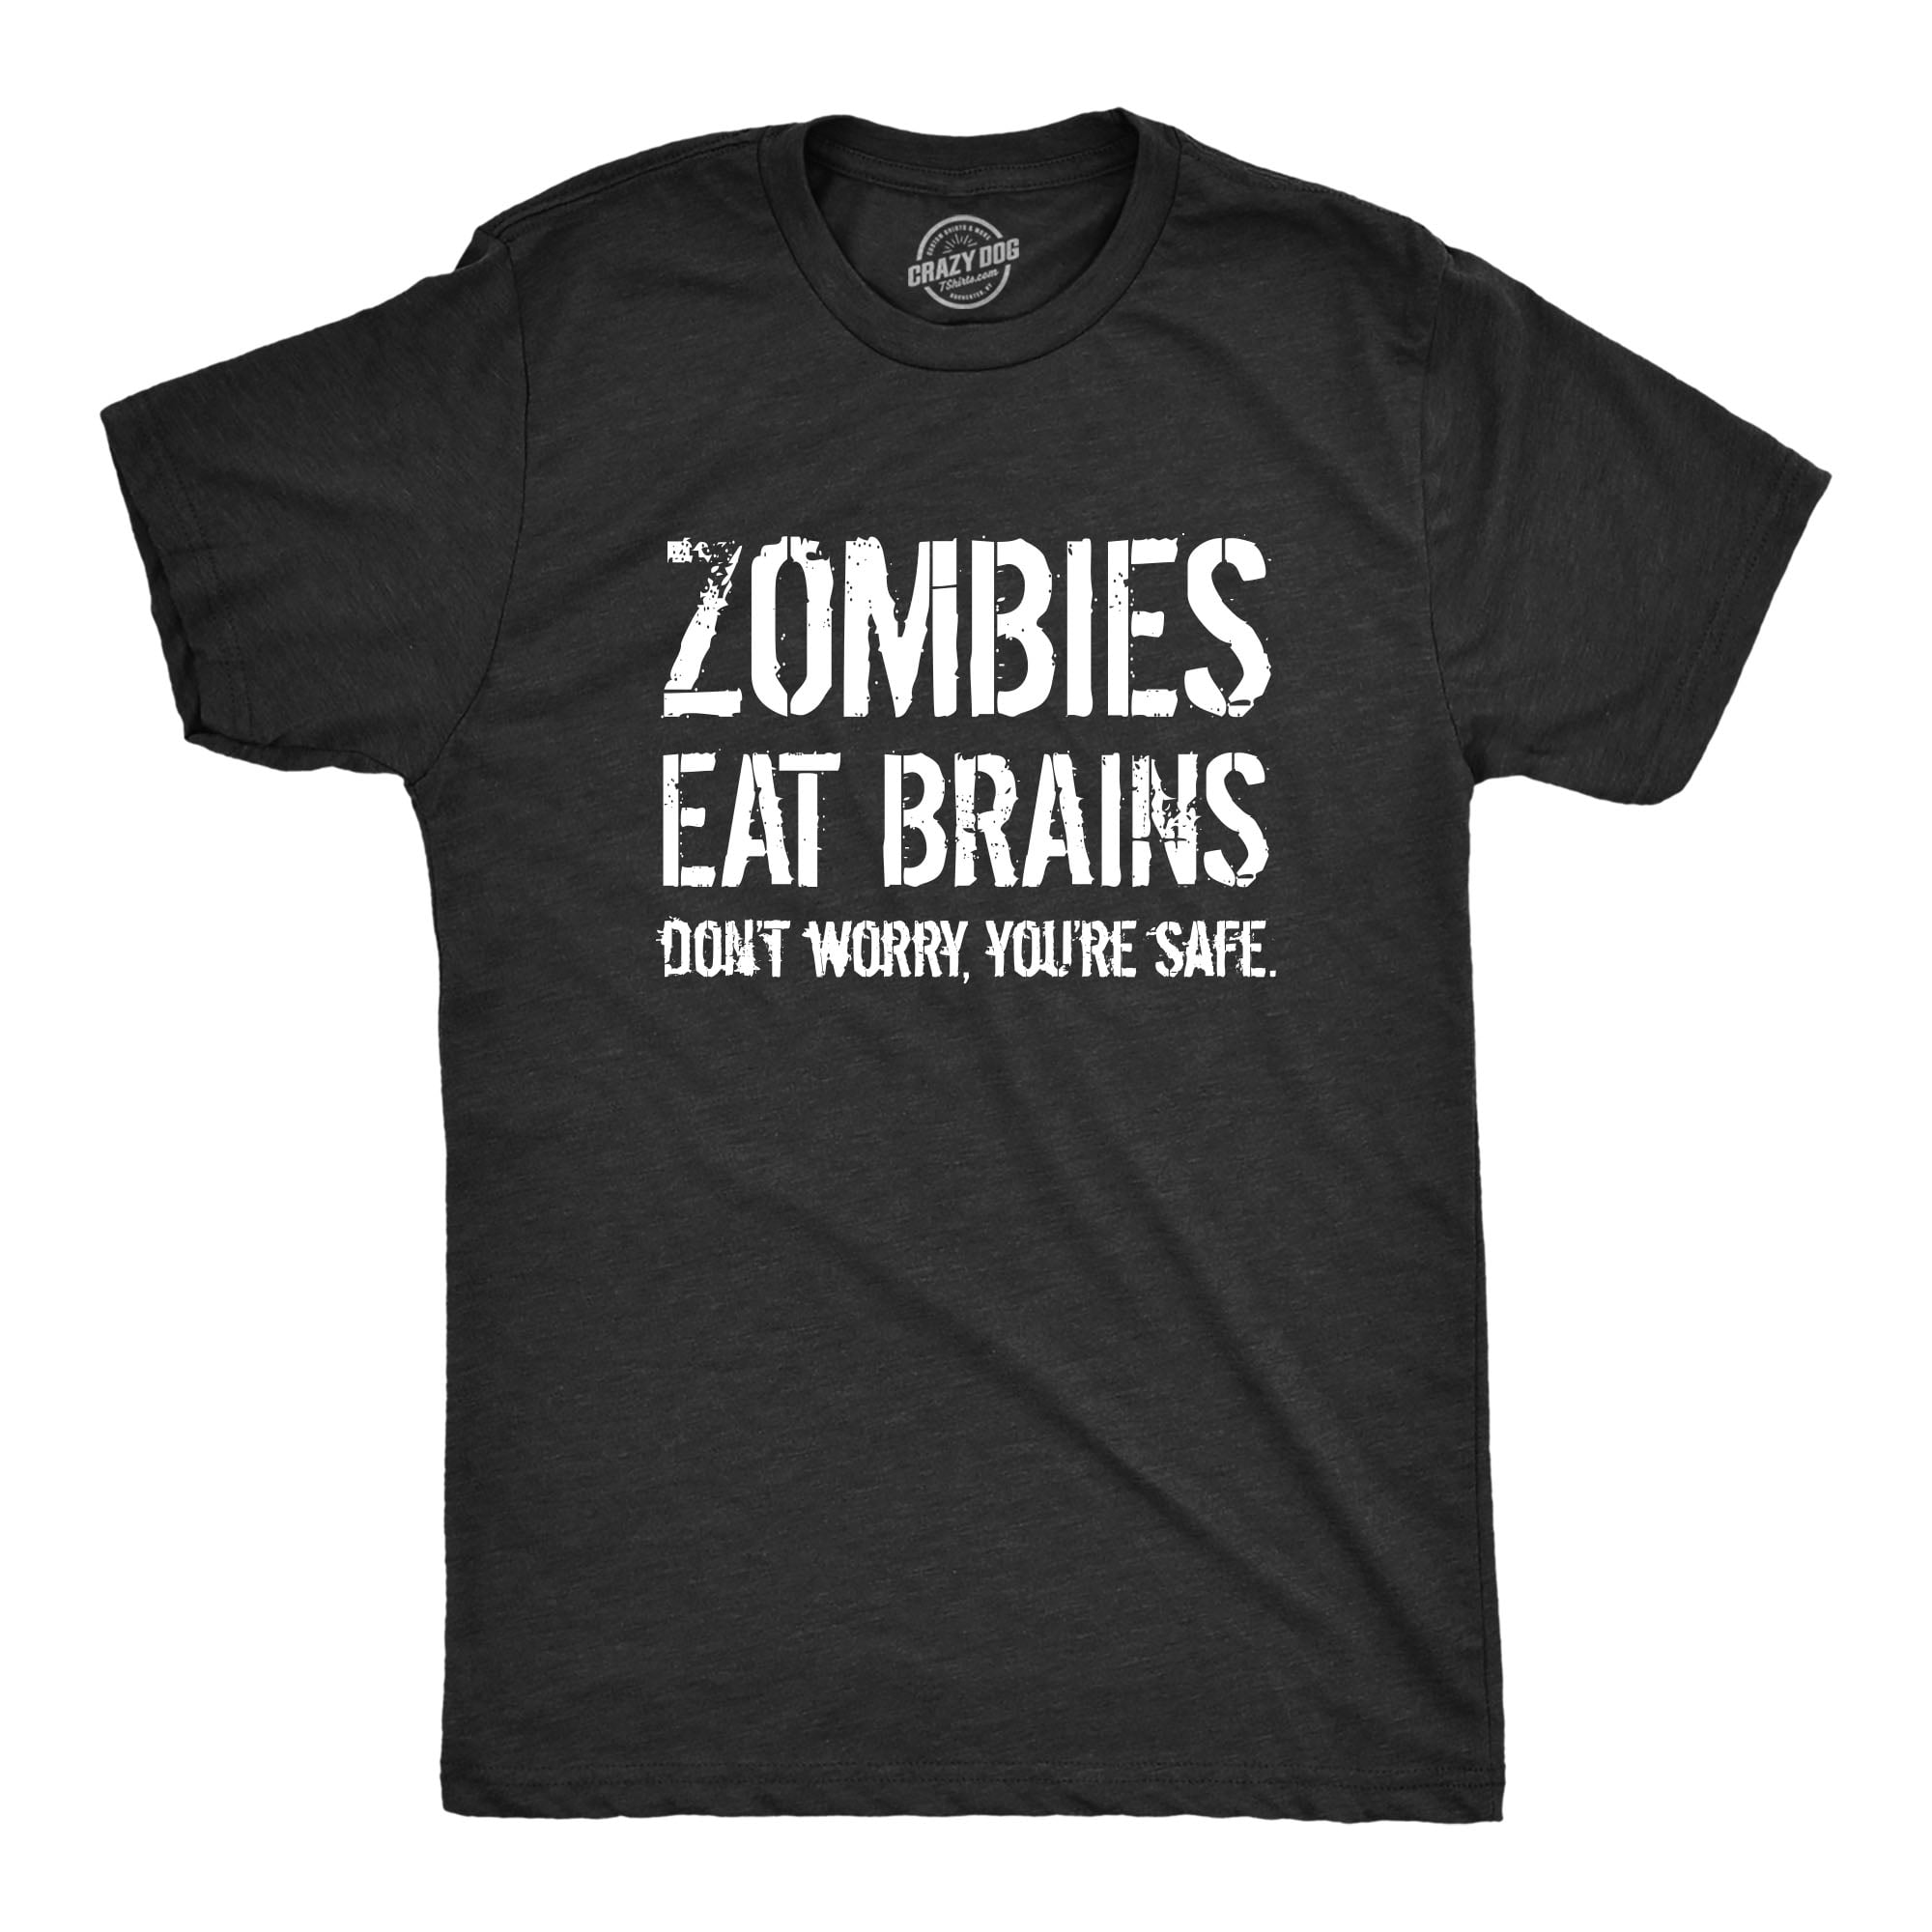 Eat brain. Футболка Brain. The Zombies ate your Brains. Zombies eat Brain dont worry you are safe.